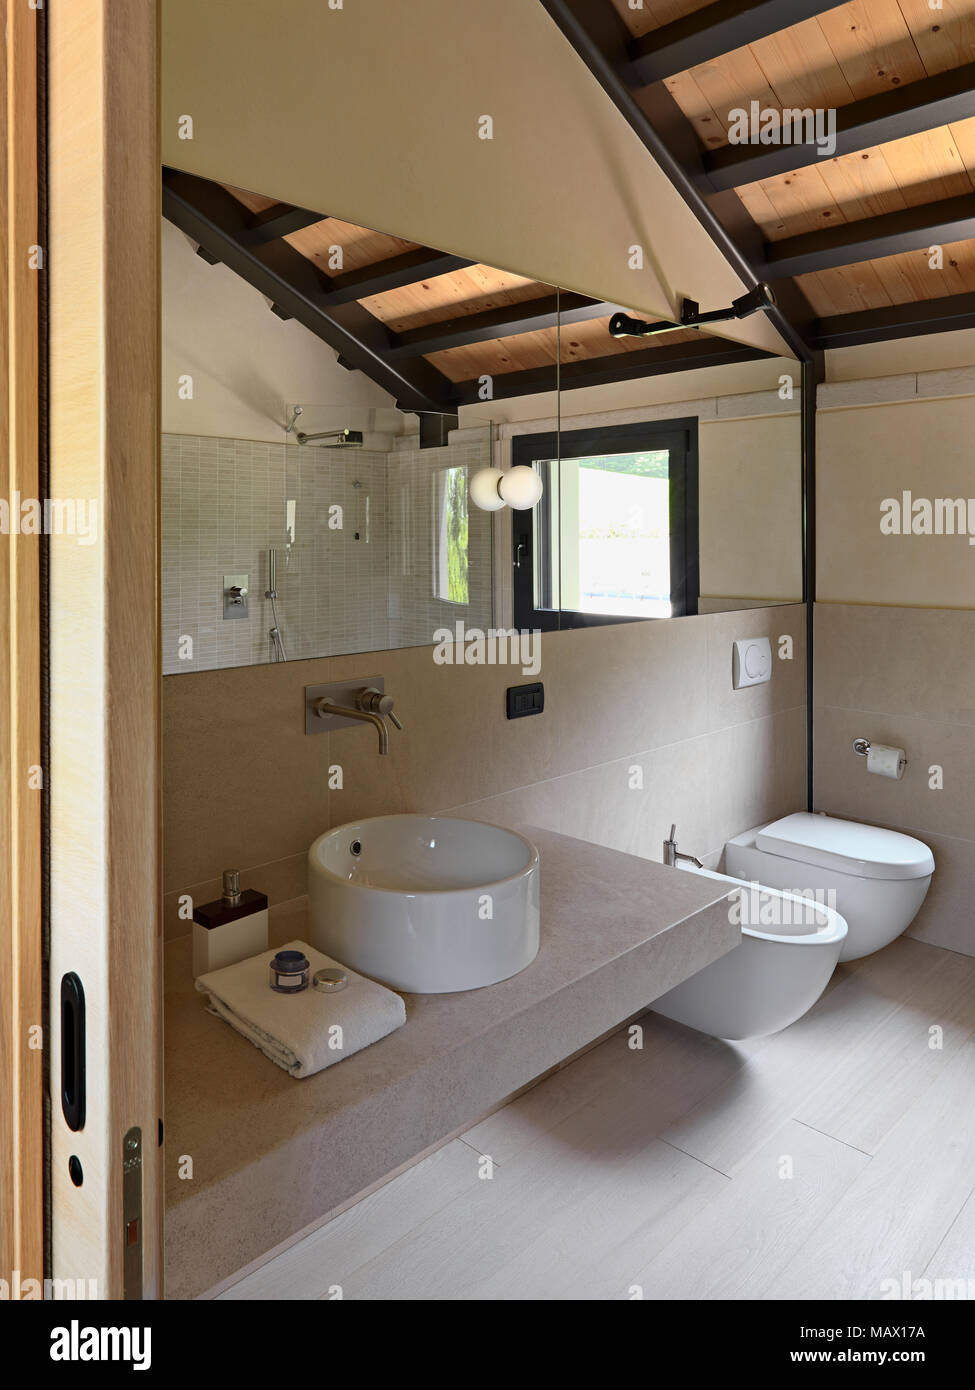 interiors hosts of a modern bathroom, in the foreground round counter top washbasin on hte marble top in background the bidet and the toilet bowl the  Stock Photo